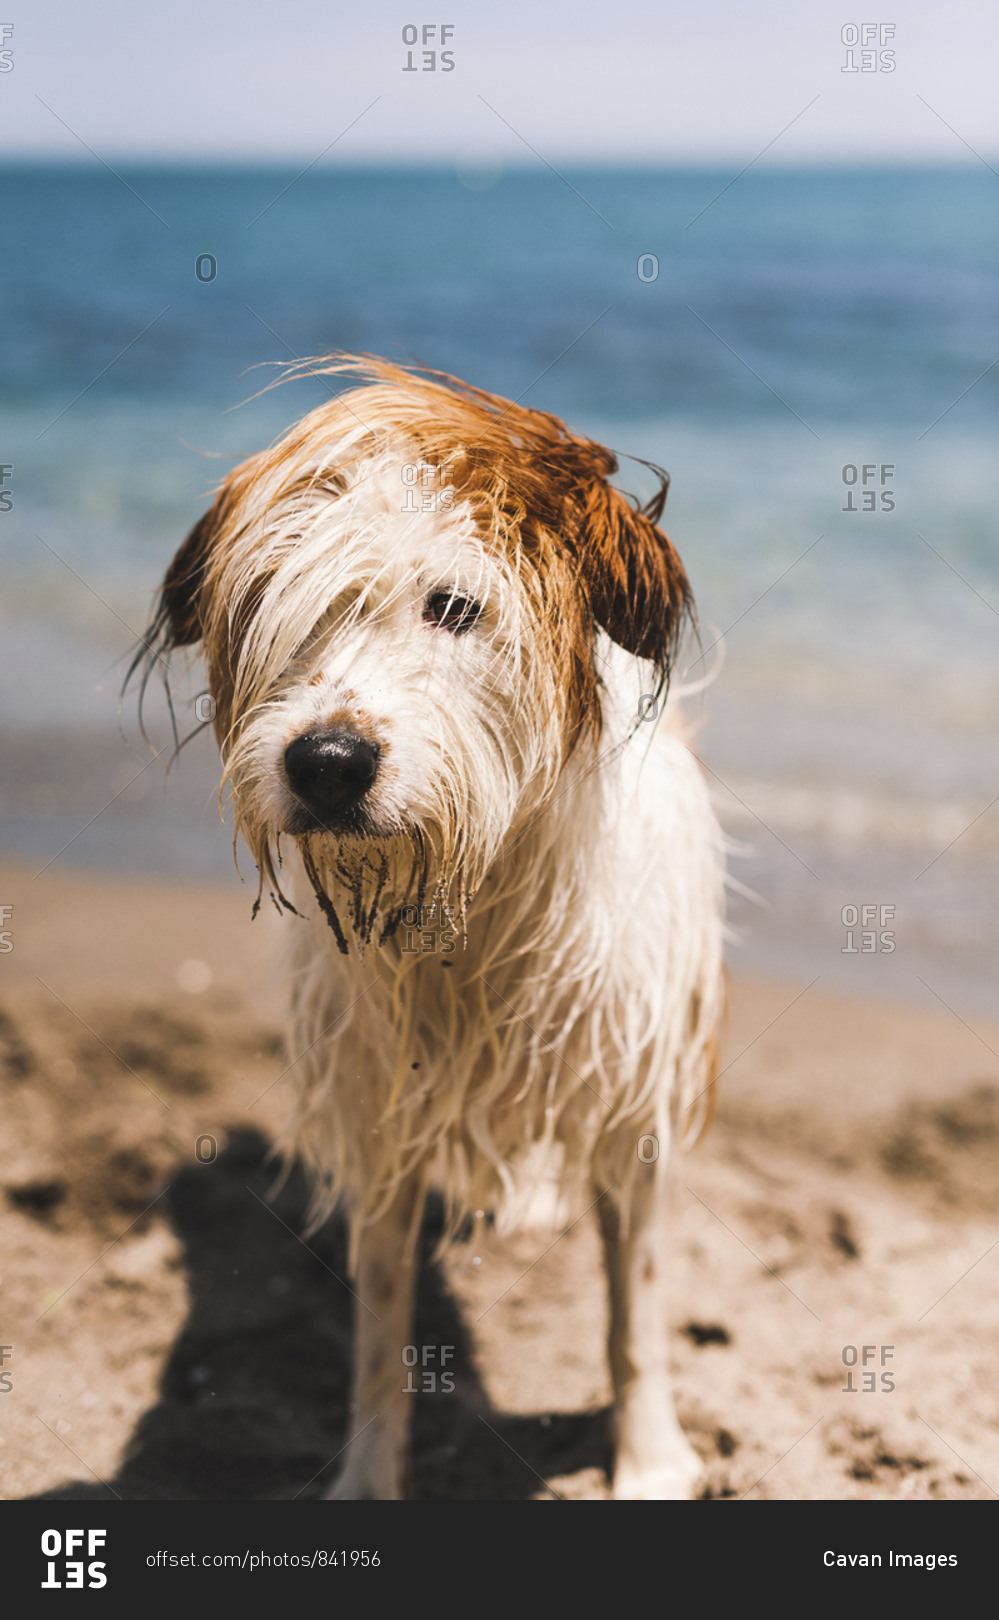 Wet hairy dog standing on shore at beach during sunny day